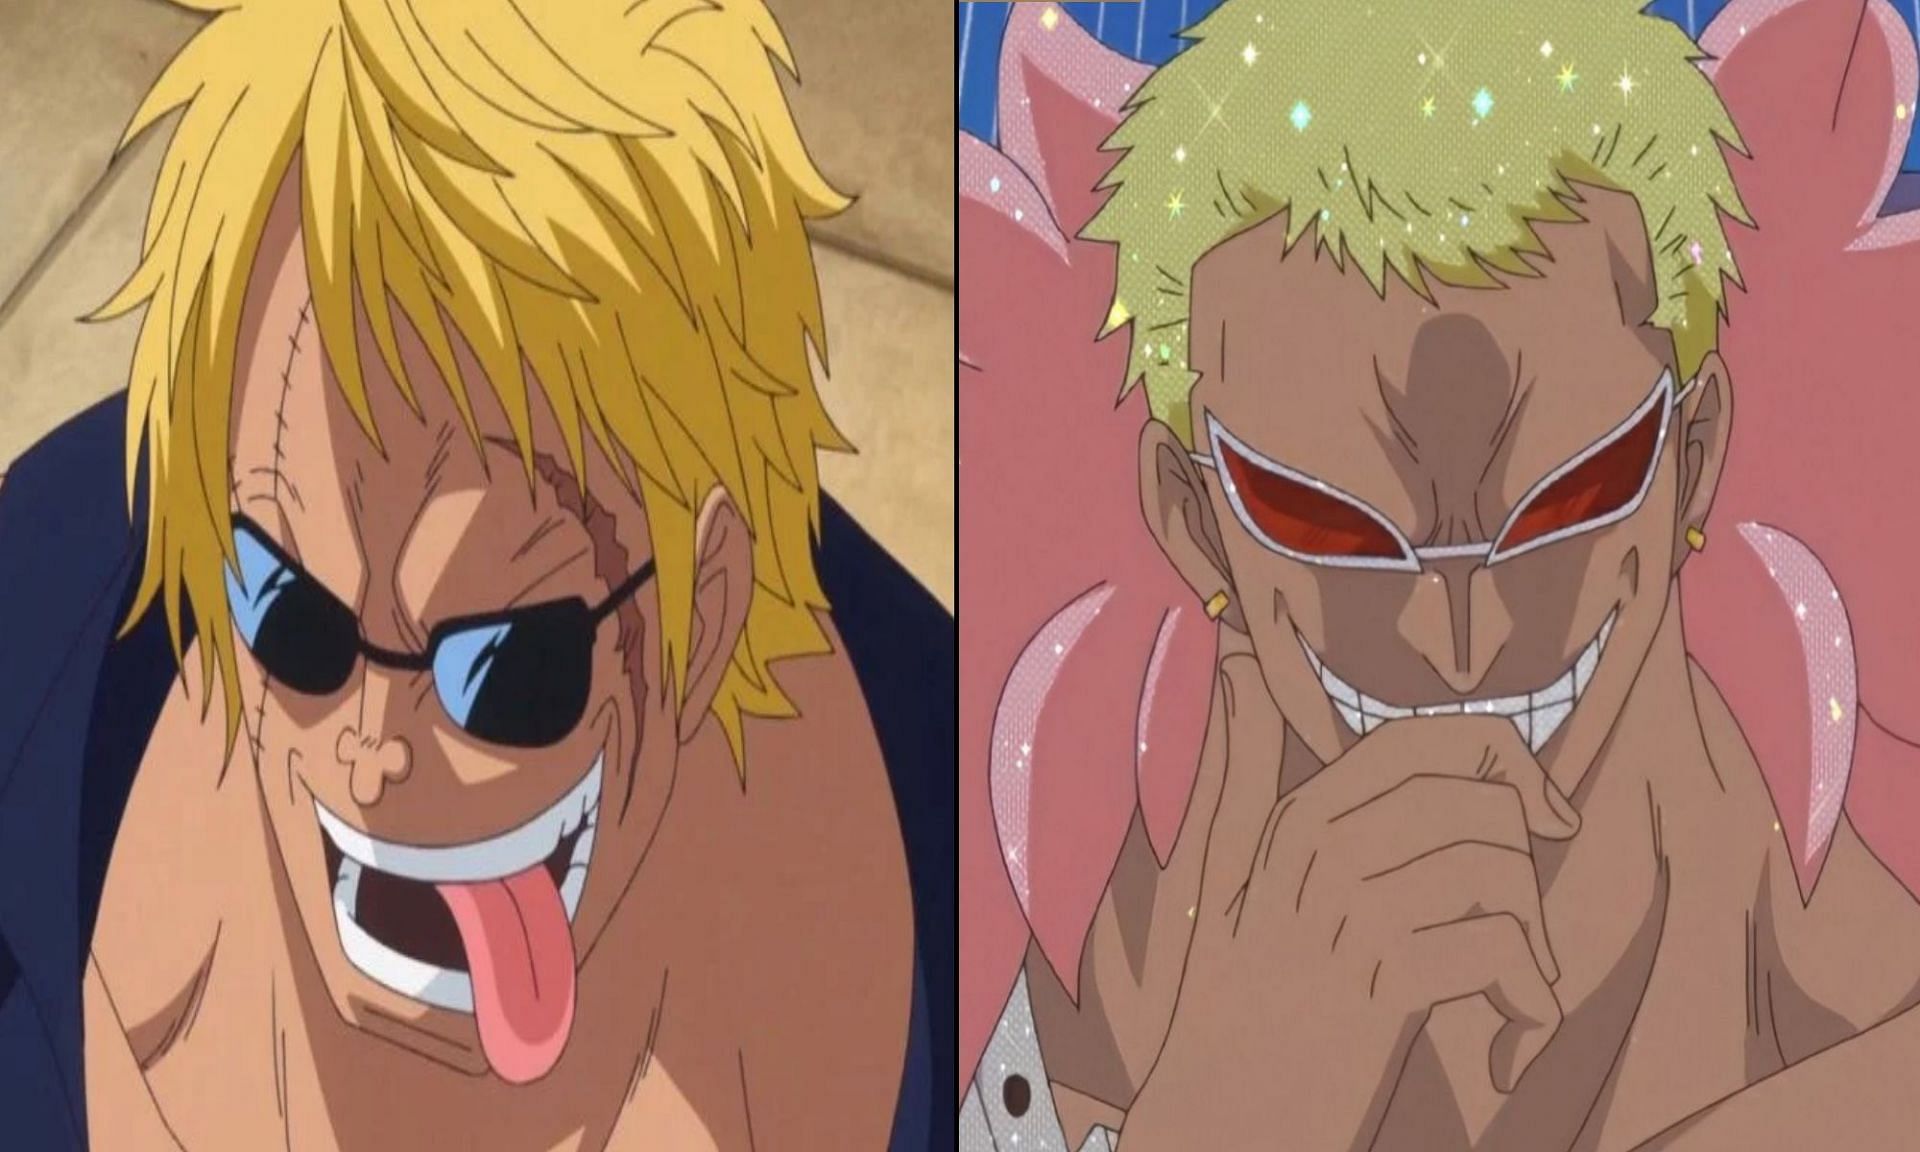 Bellamy and Donquixote Doflamingo have entirely different relationships with Luffy (Image via Sportskeeda)